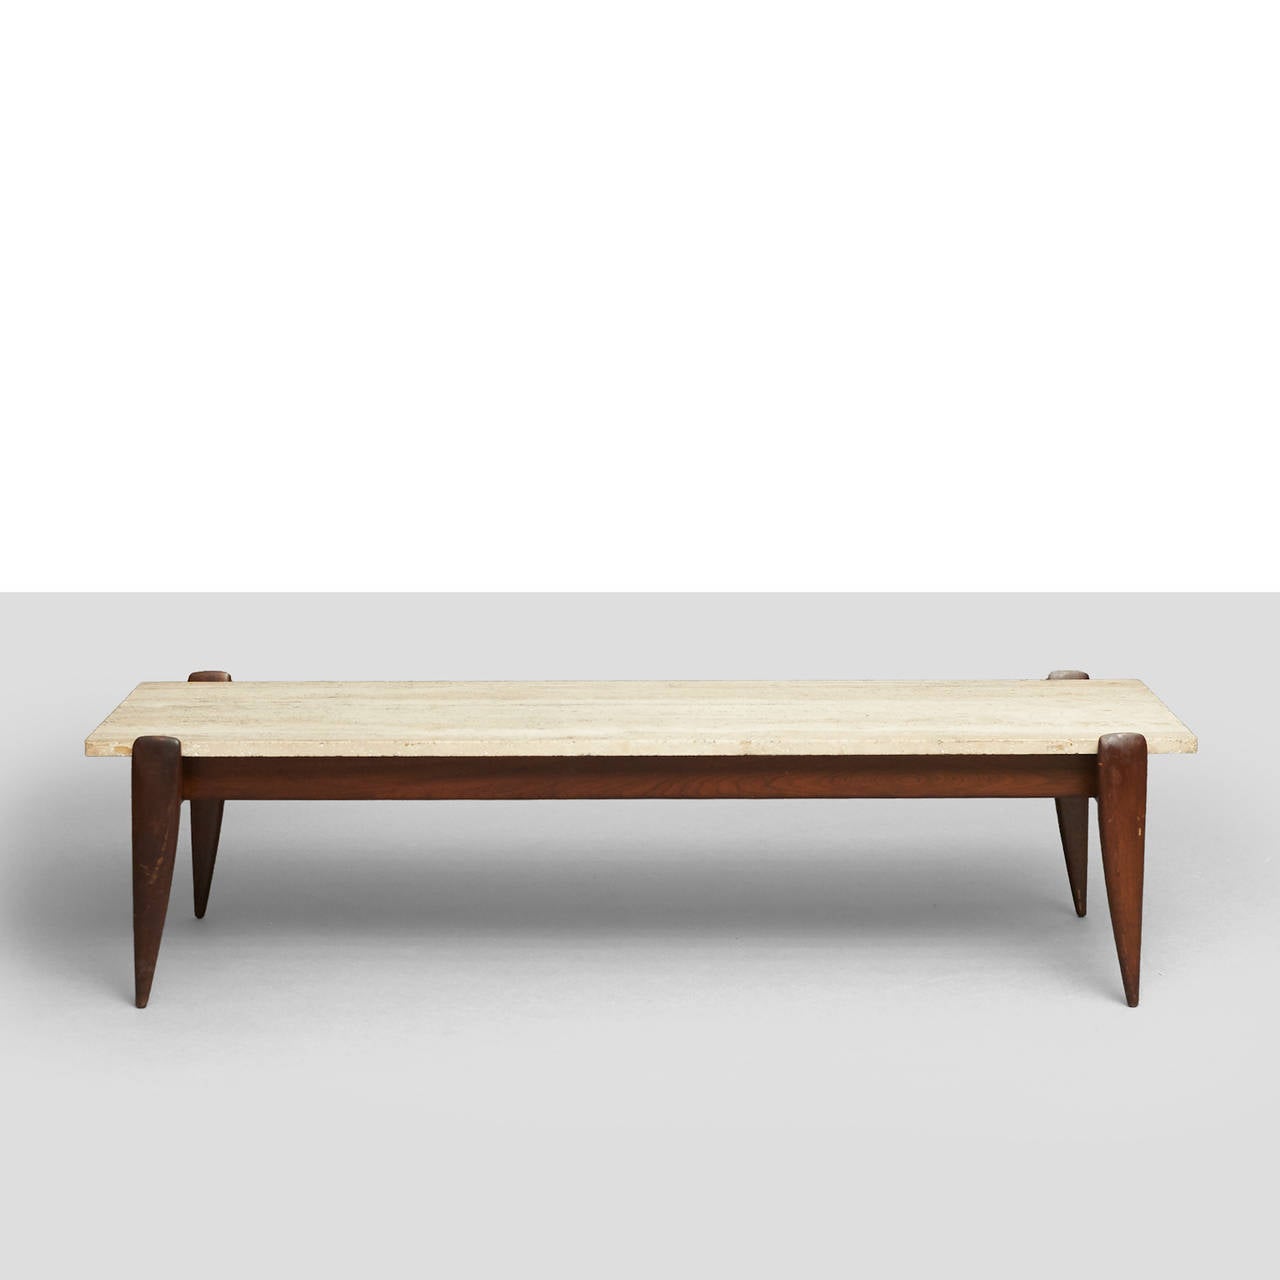 A walnut coffee table with travertine top by Gio Ponti, stone stamped 